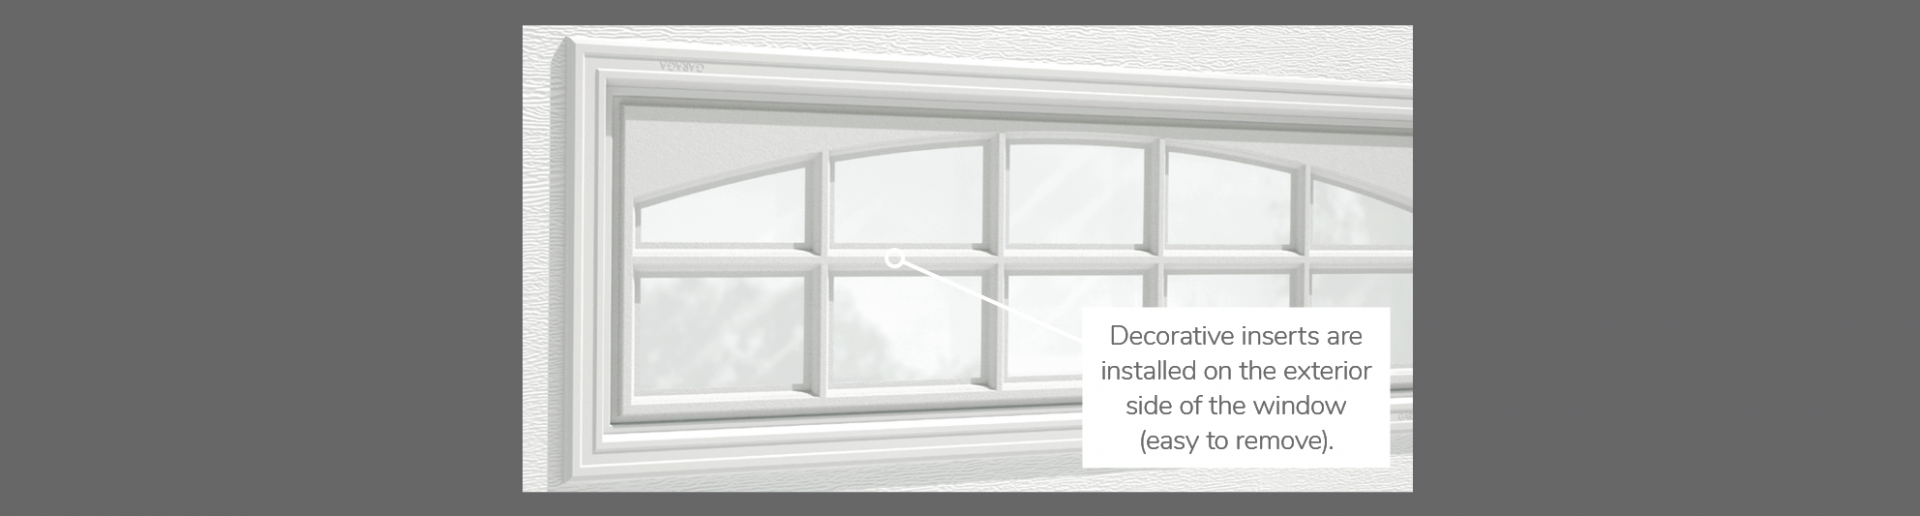 Cascade Decorative Insert, 41" x 16", available for door 3 layers - Polystyrene, 2 layers - Polystyrene and Non-insulated